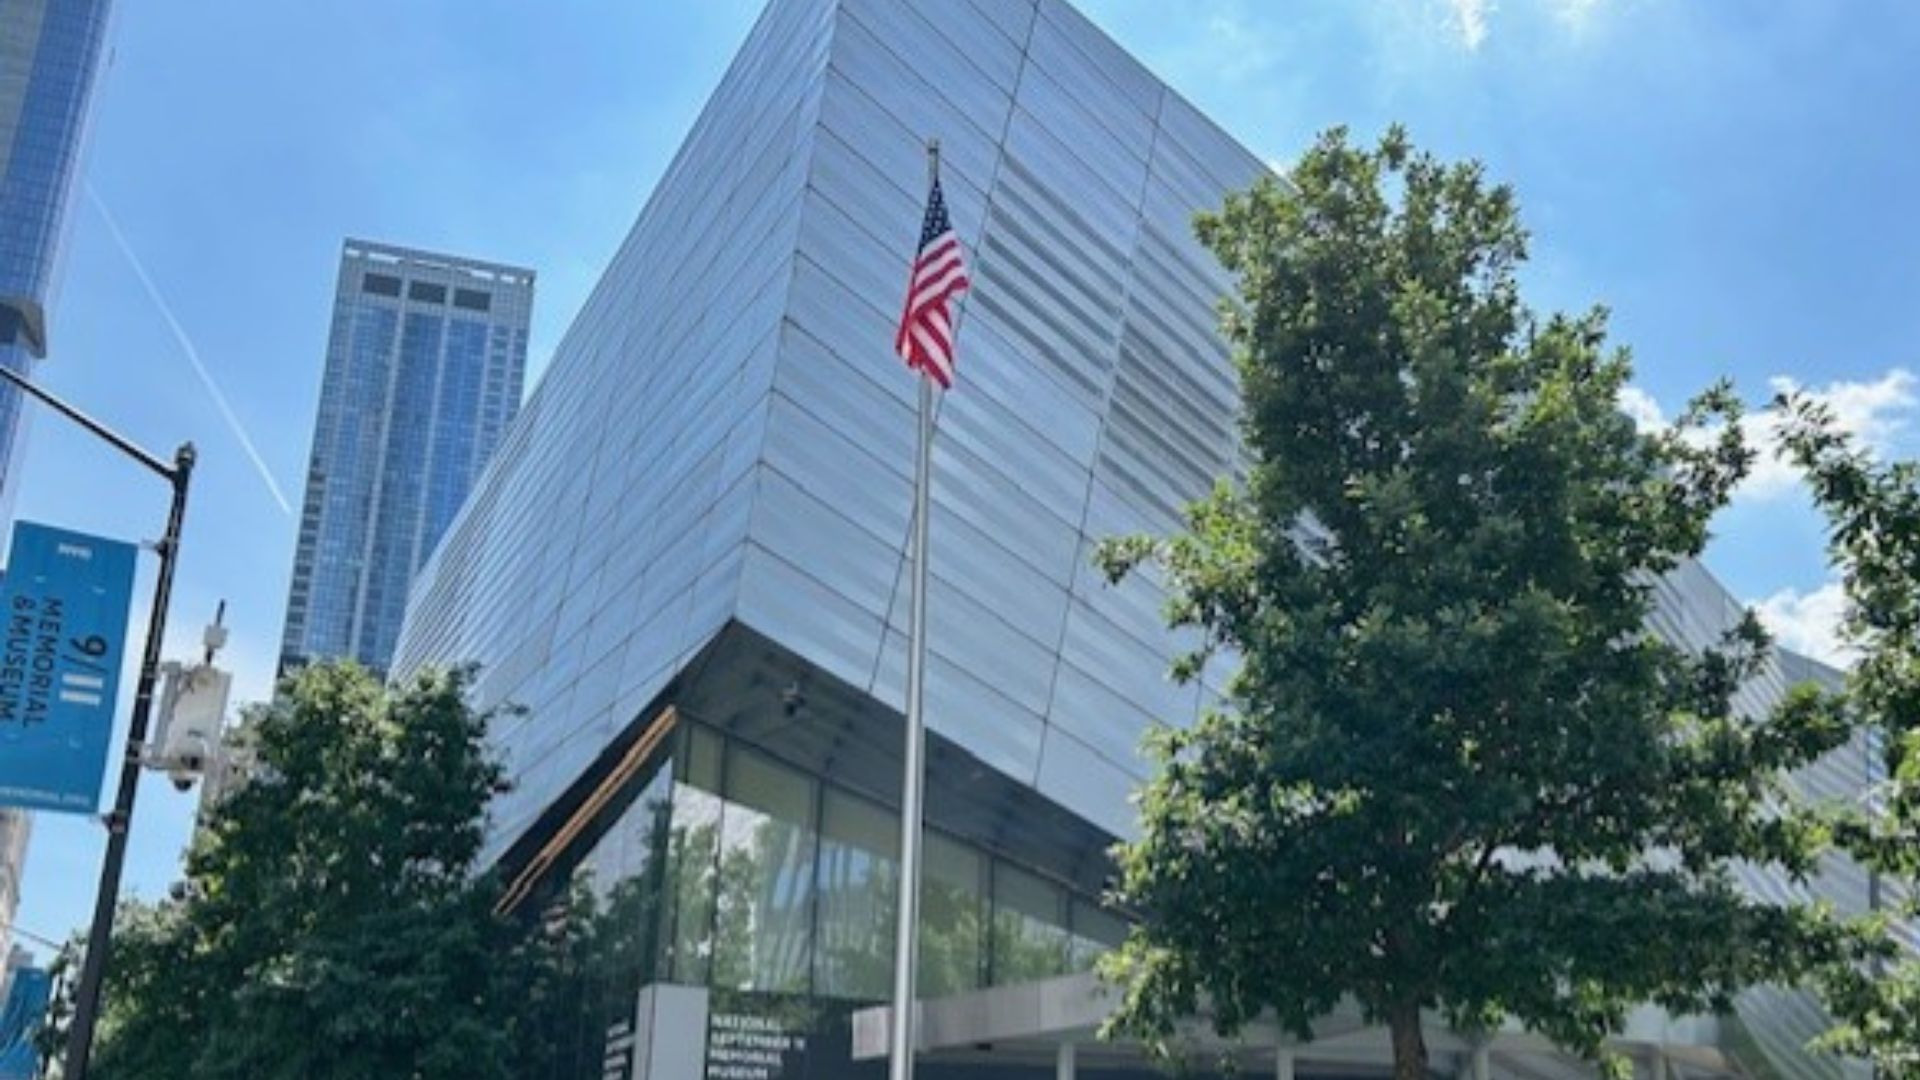 Exterior of the 9/11 Memorial & Museum against a blue sky, with green trees and an American flag on a flagpole at the foreground